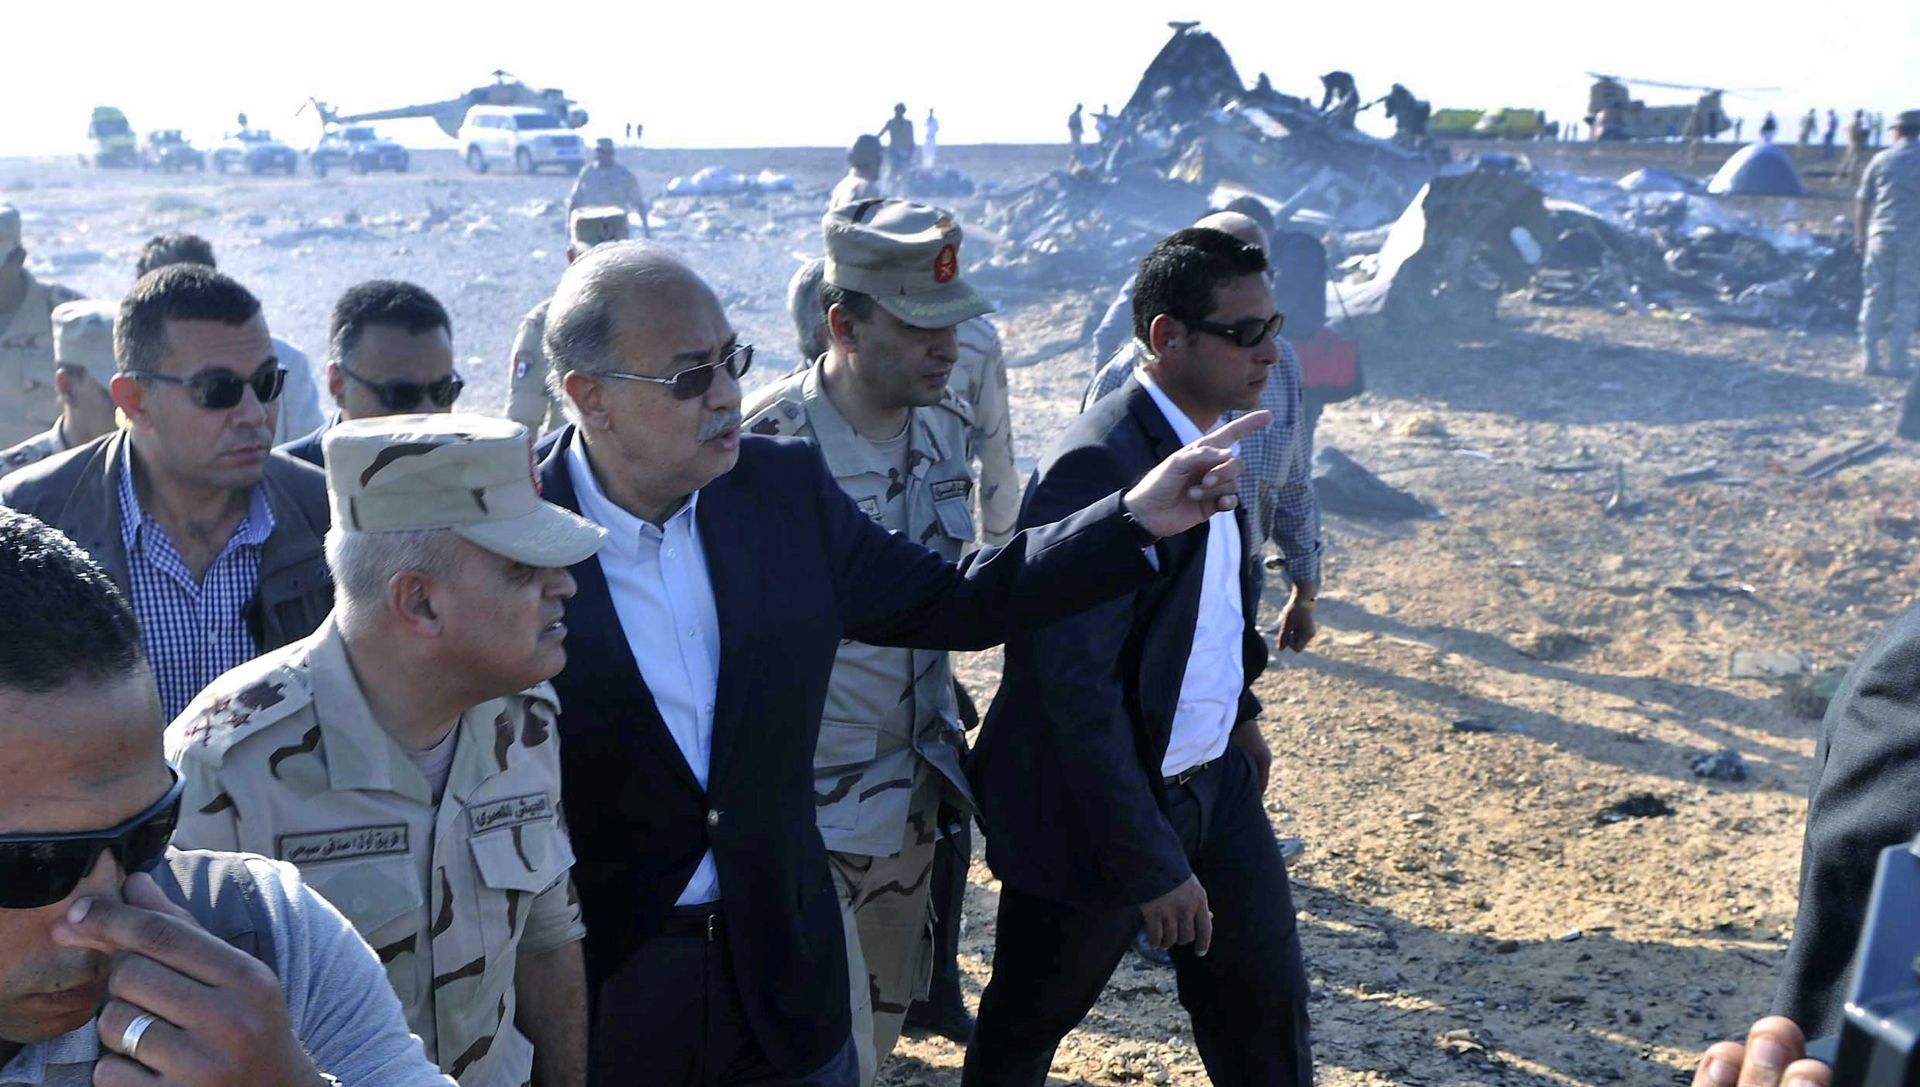 epa05005078 The Egyptian Prime Minister, Sherif Ismail (3 - L), examines the wreckage at the site of the Russian plane crash, Sinai, Egypt, 31 October 2015. According to reports the Egyptian Government has dispatched more than 45 ambulances to the crash site of the Kogalymavia Metrojet Russian passenger jet, which disappeared from raider after requesting an emergency landing early 31 October, crashing in the mountainous al-Hasanah area of central Sinai. The black box has been recovered at the site.  EPA/STR EGYPT OUT